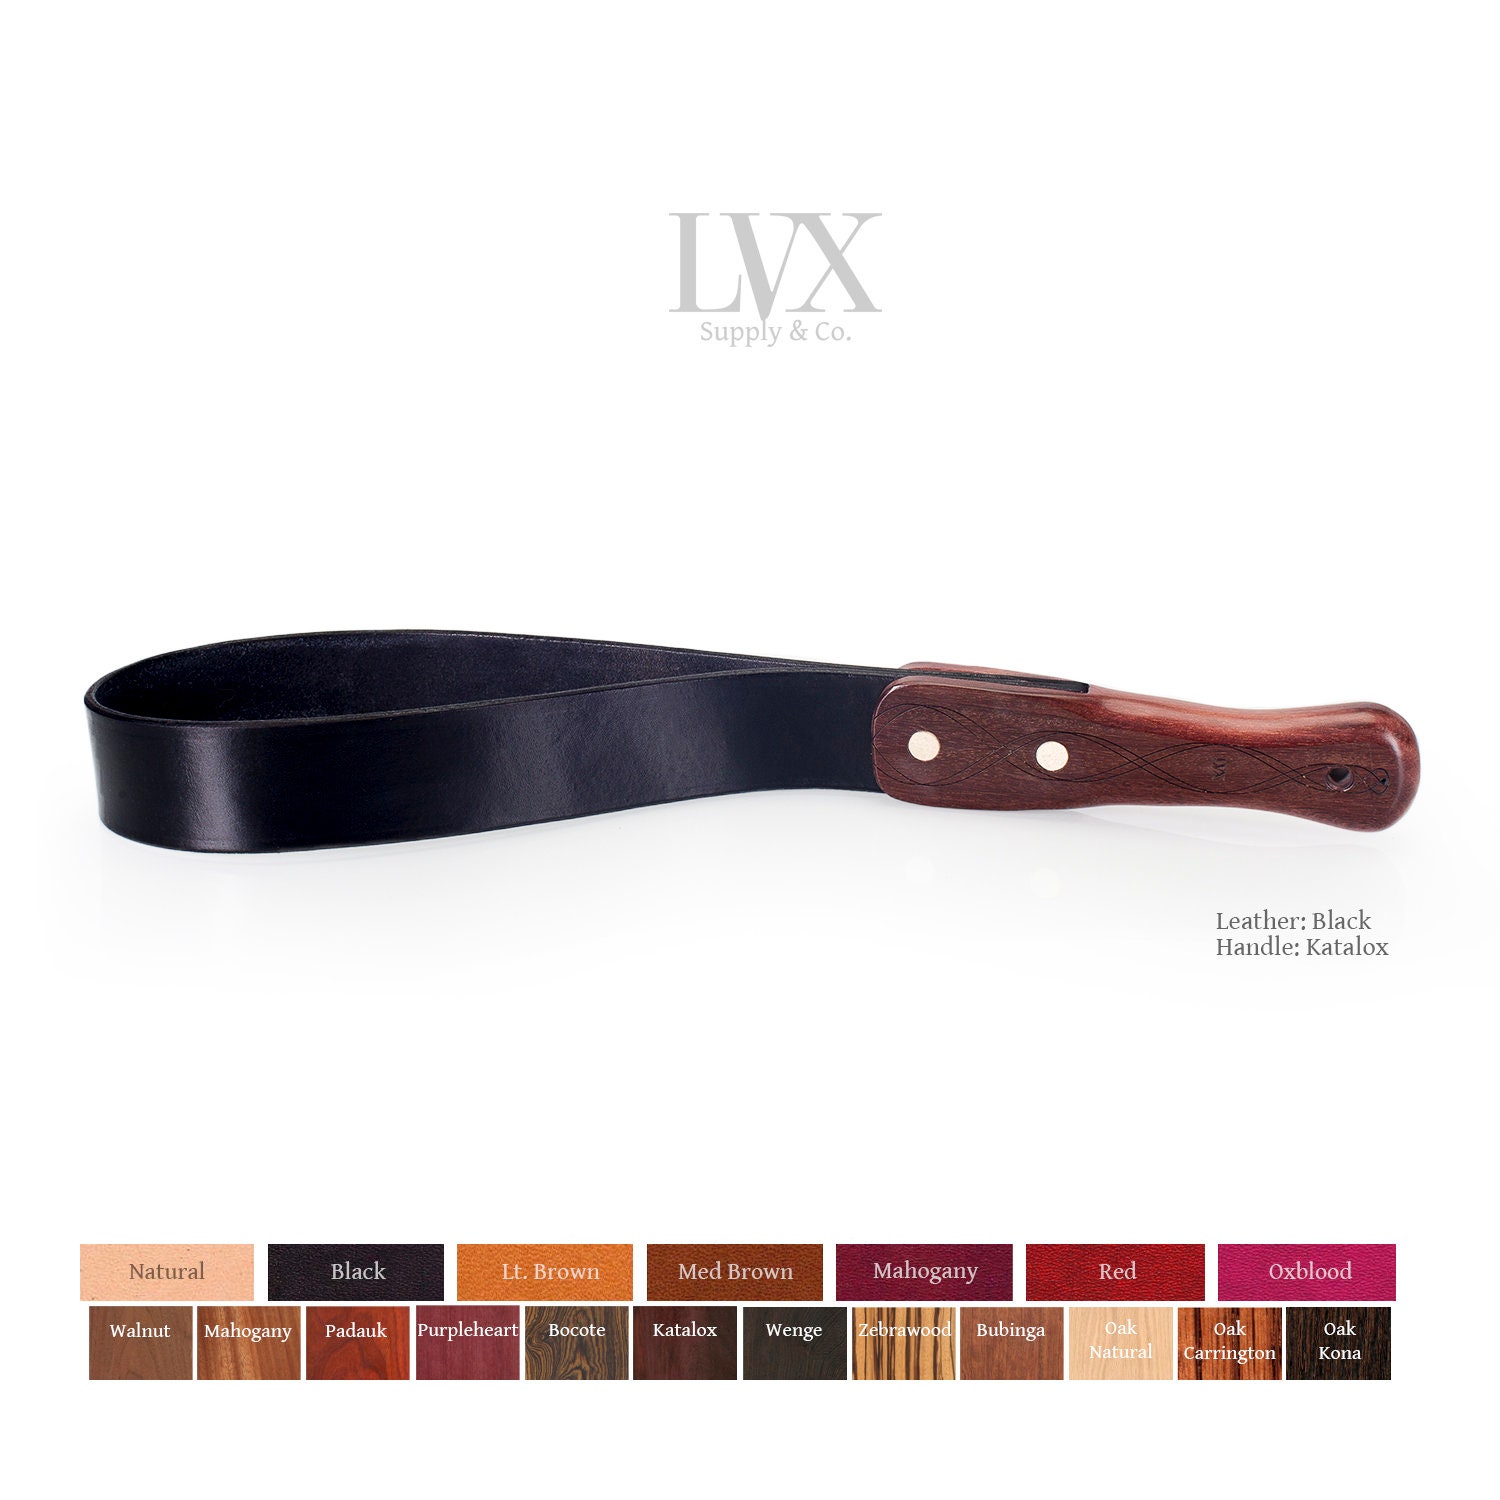 Leather Strap Paddle | Tawse Spanking Paddle, Long Riding Crop, Spanking Belt, BDsM toys for submissive | BDSM Leather Paddle by LVX Supply photo